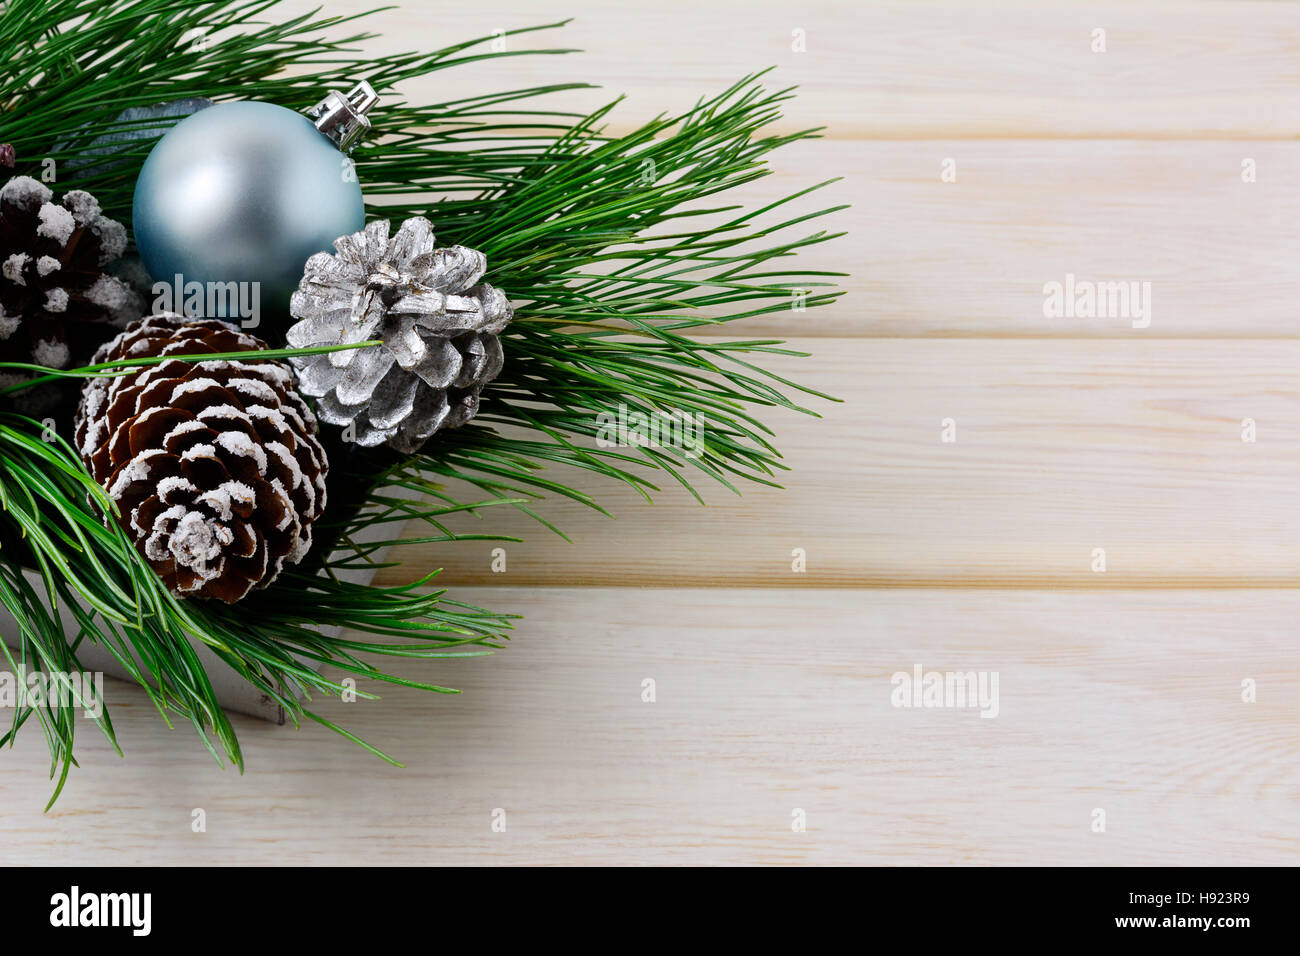 Christmas background with blue ornaments, silver and snowy pinecones. Christmas table decorated centerpiece. Copy space. Stock Photo